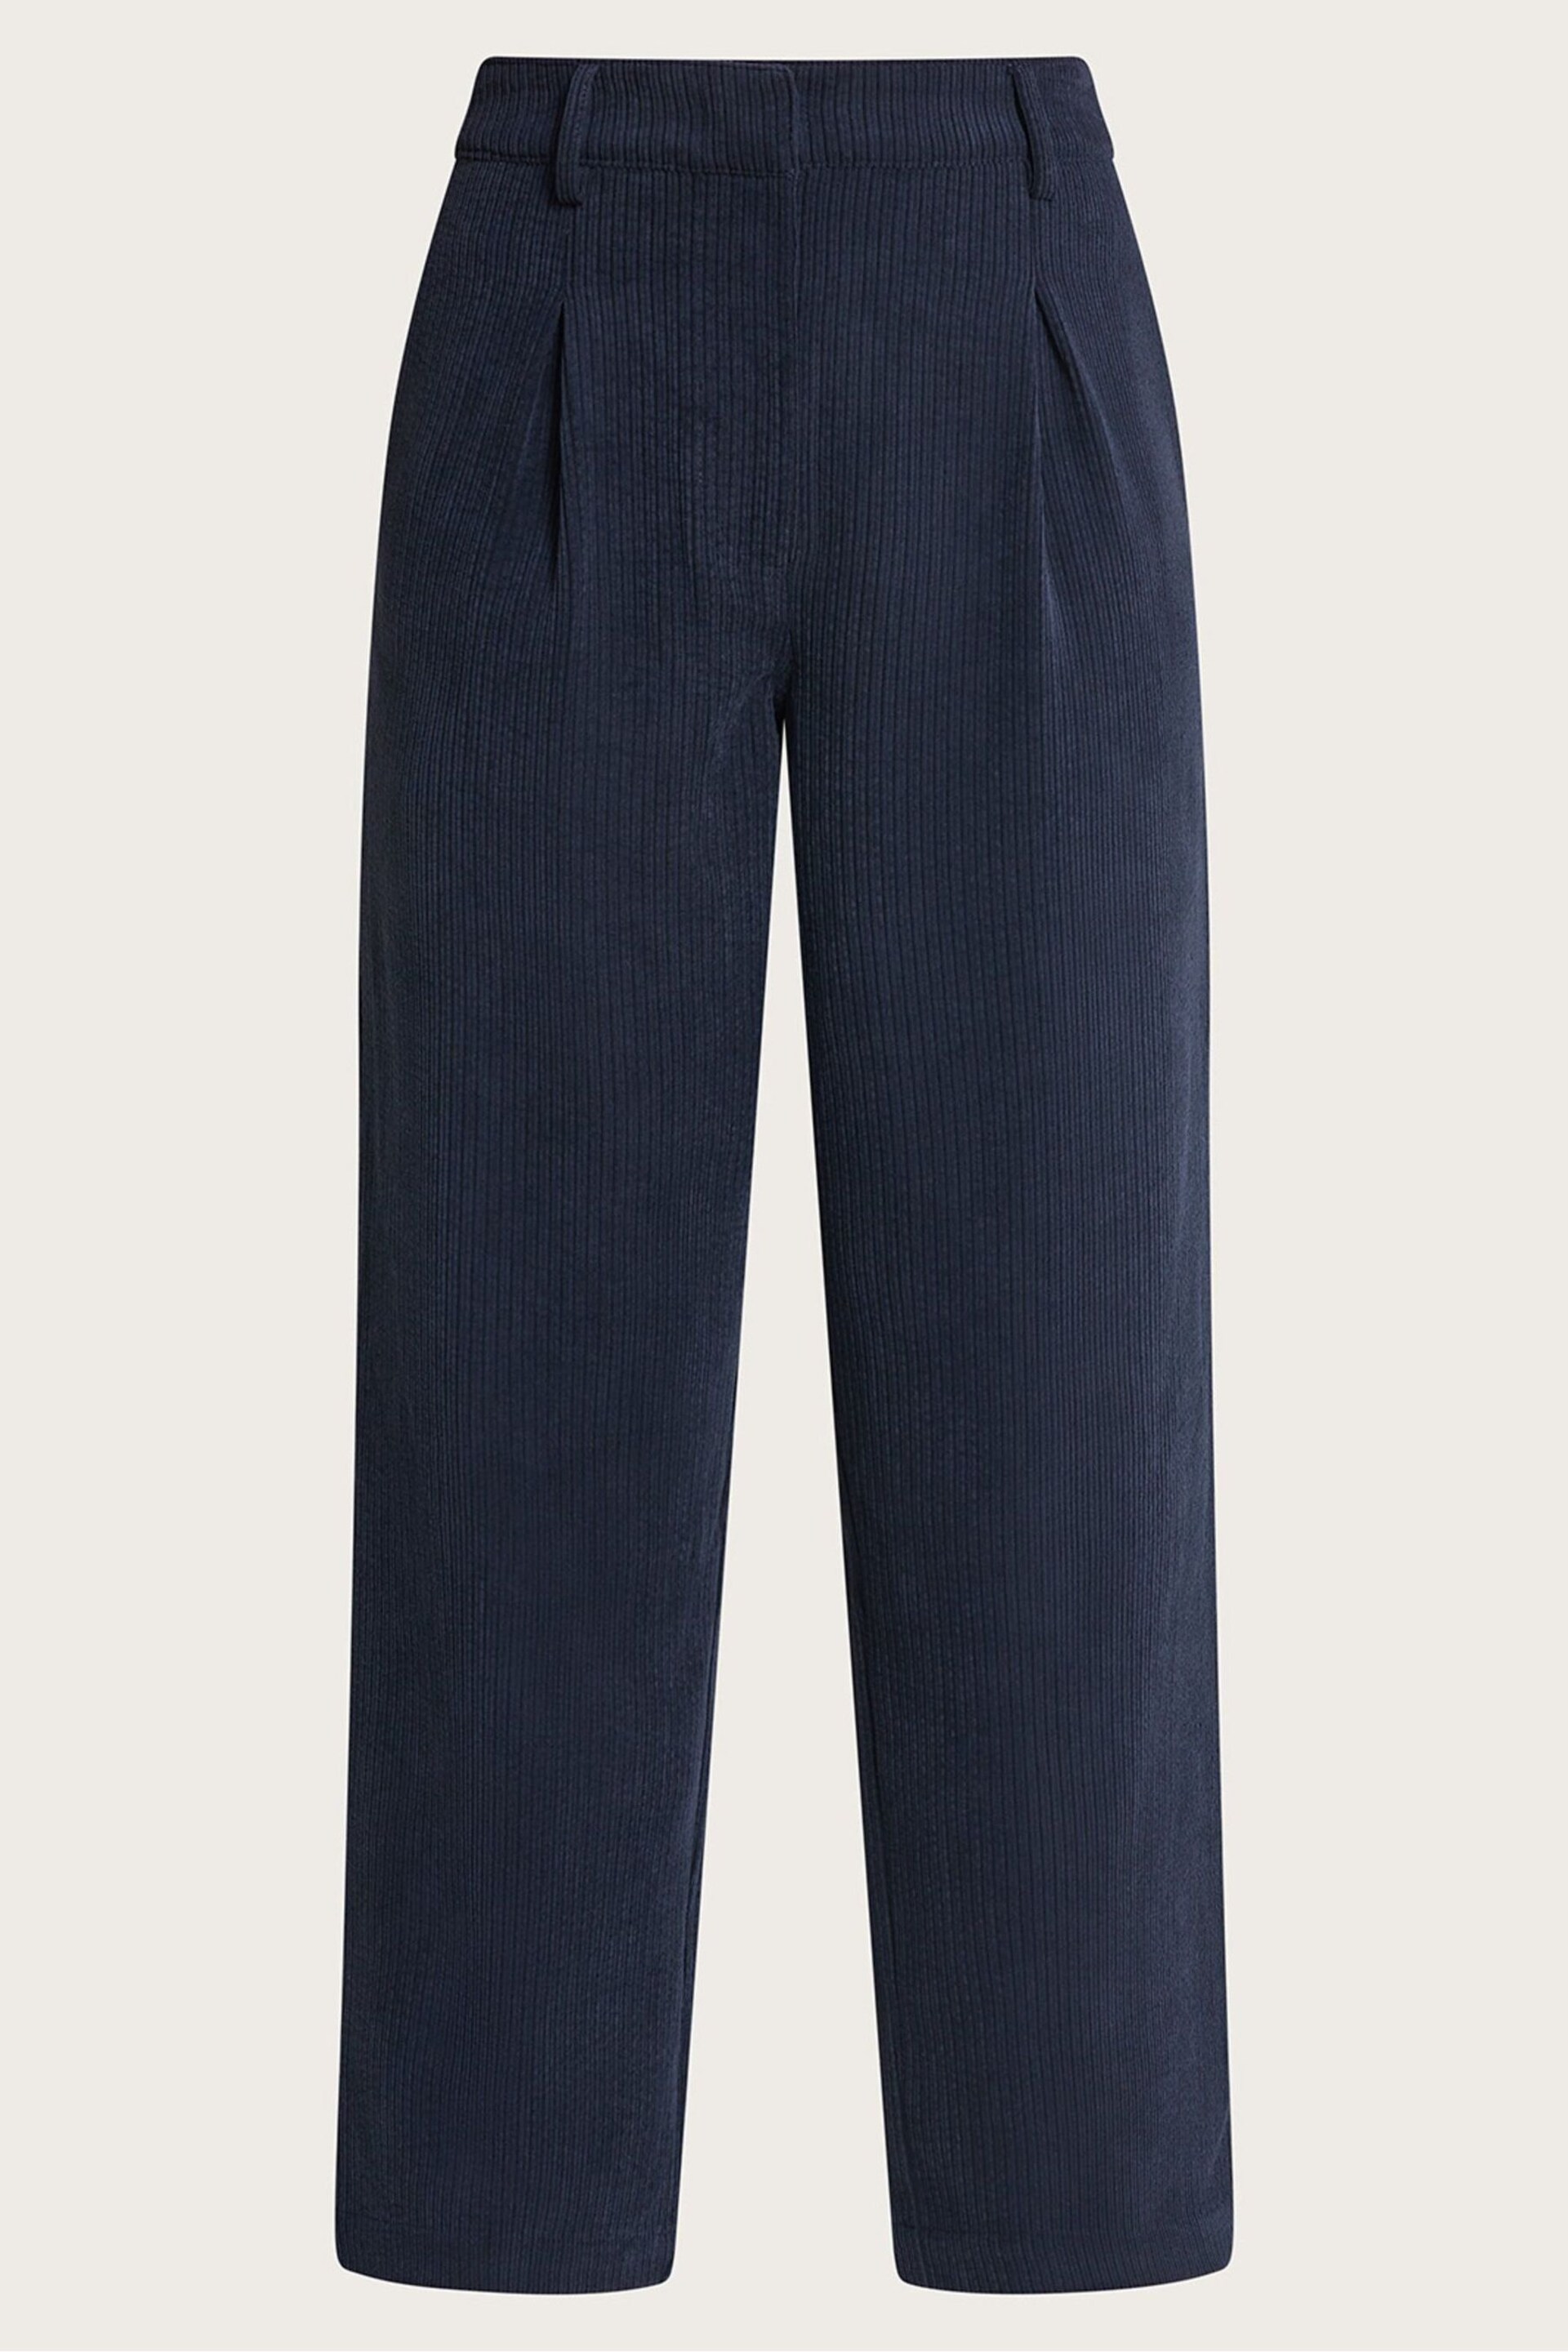 Monsoon Blue Serena Wide Leg Cord Trousers - Image 5 of 5